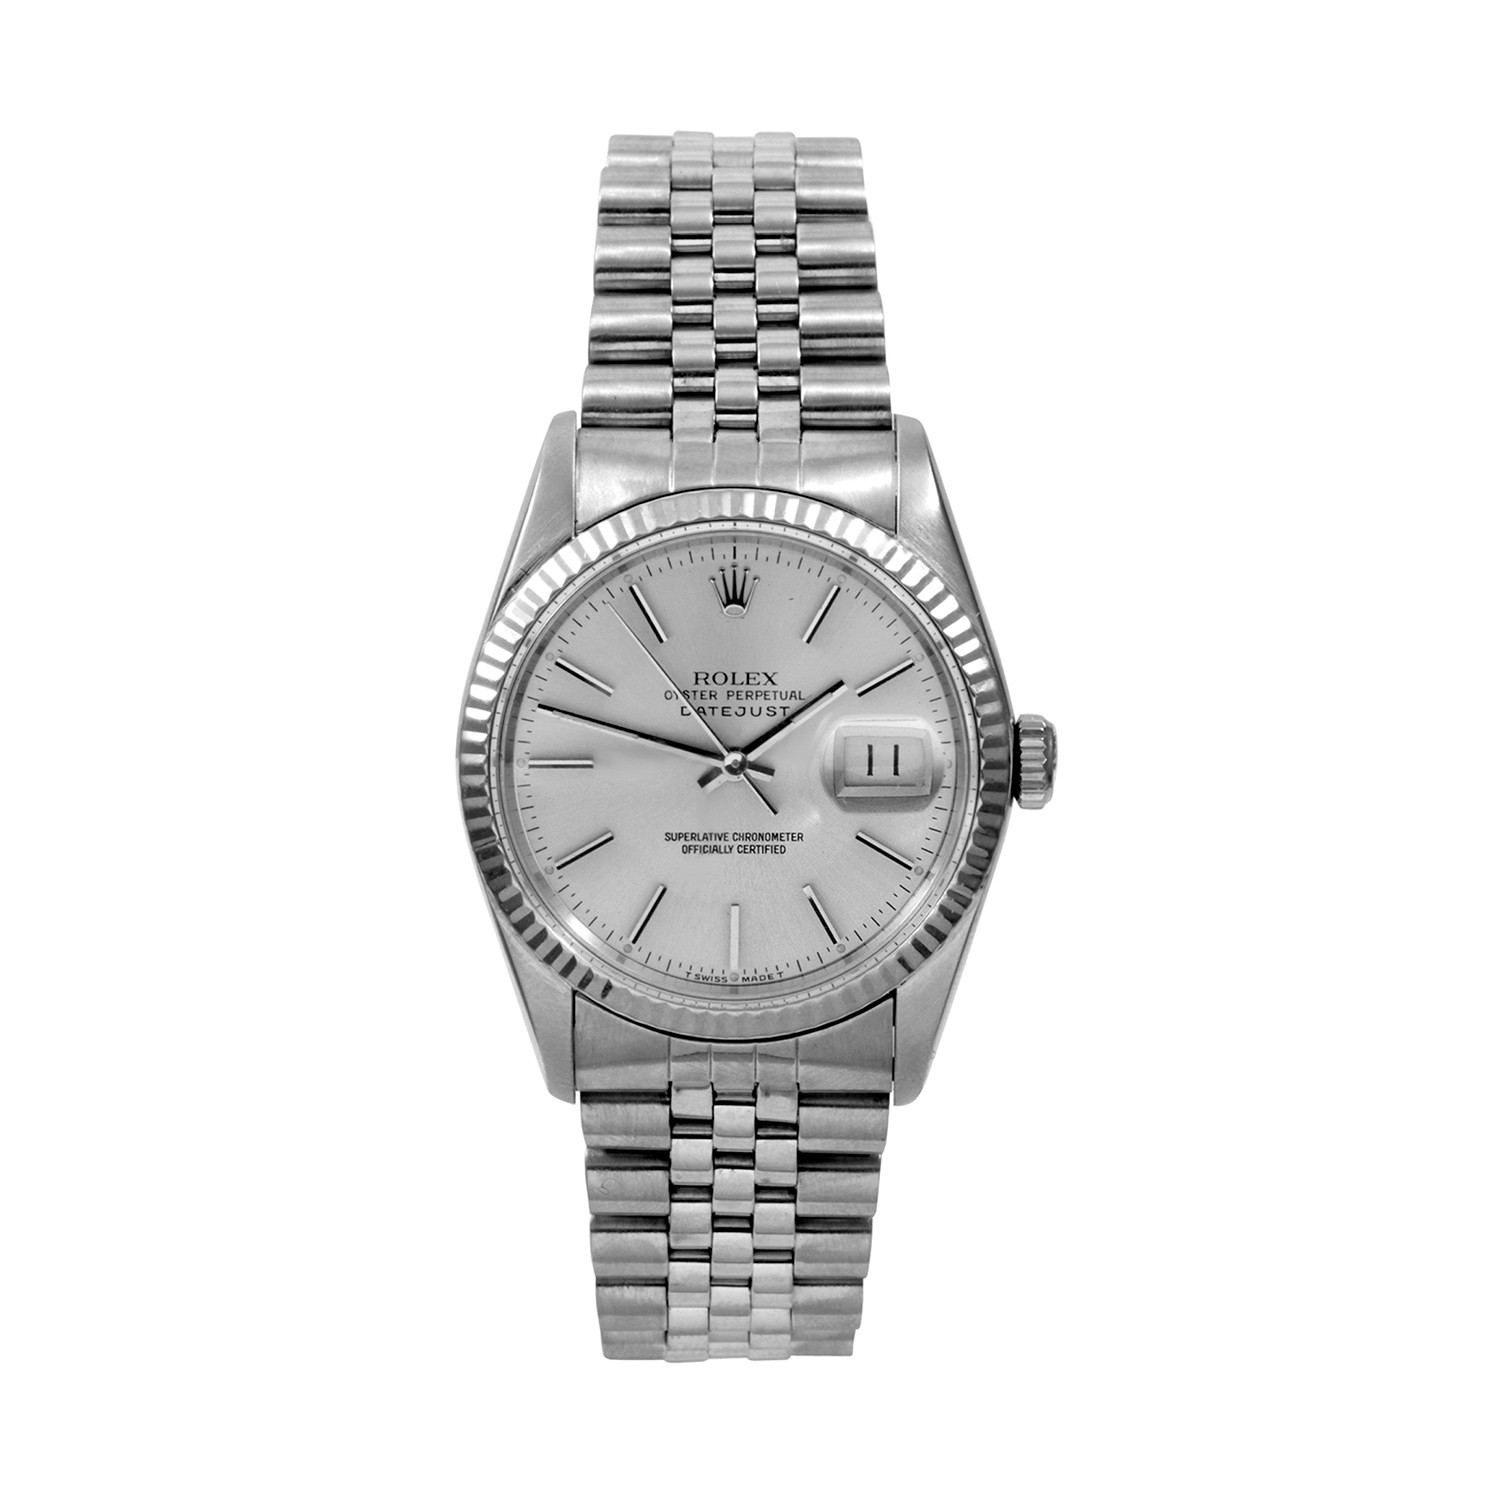 Datejust Automatic // 16014 // HJWN-001 